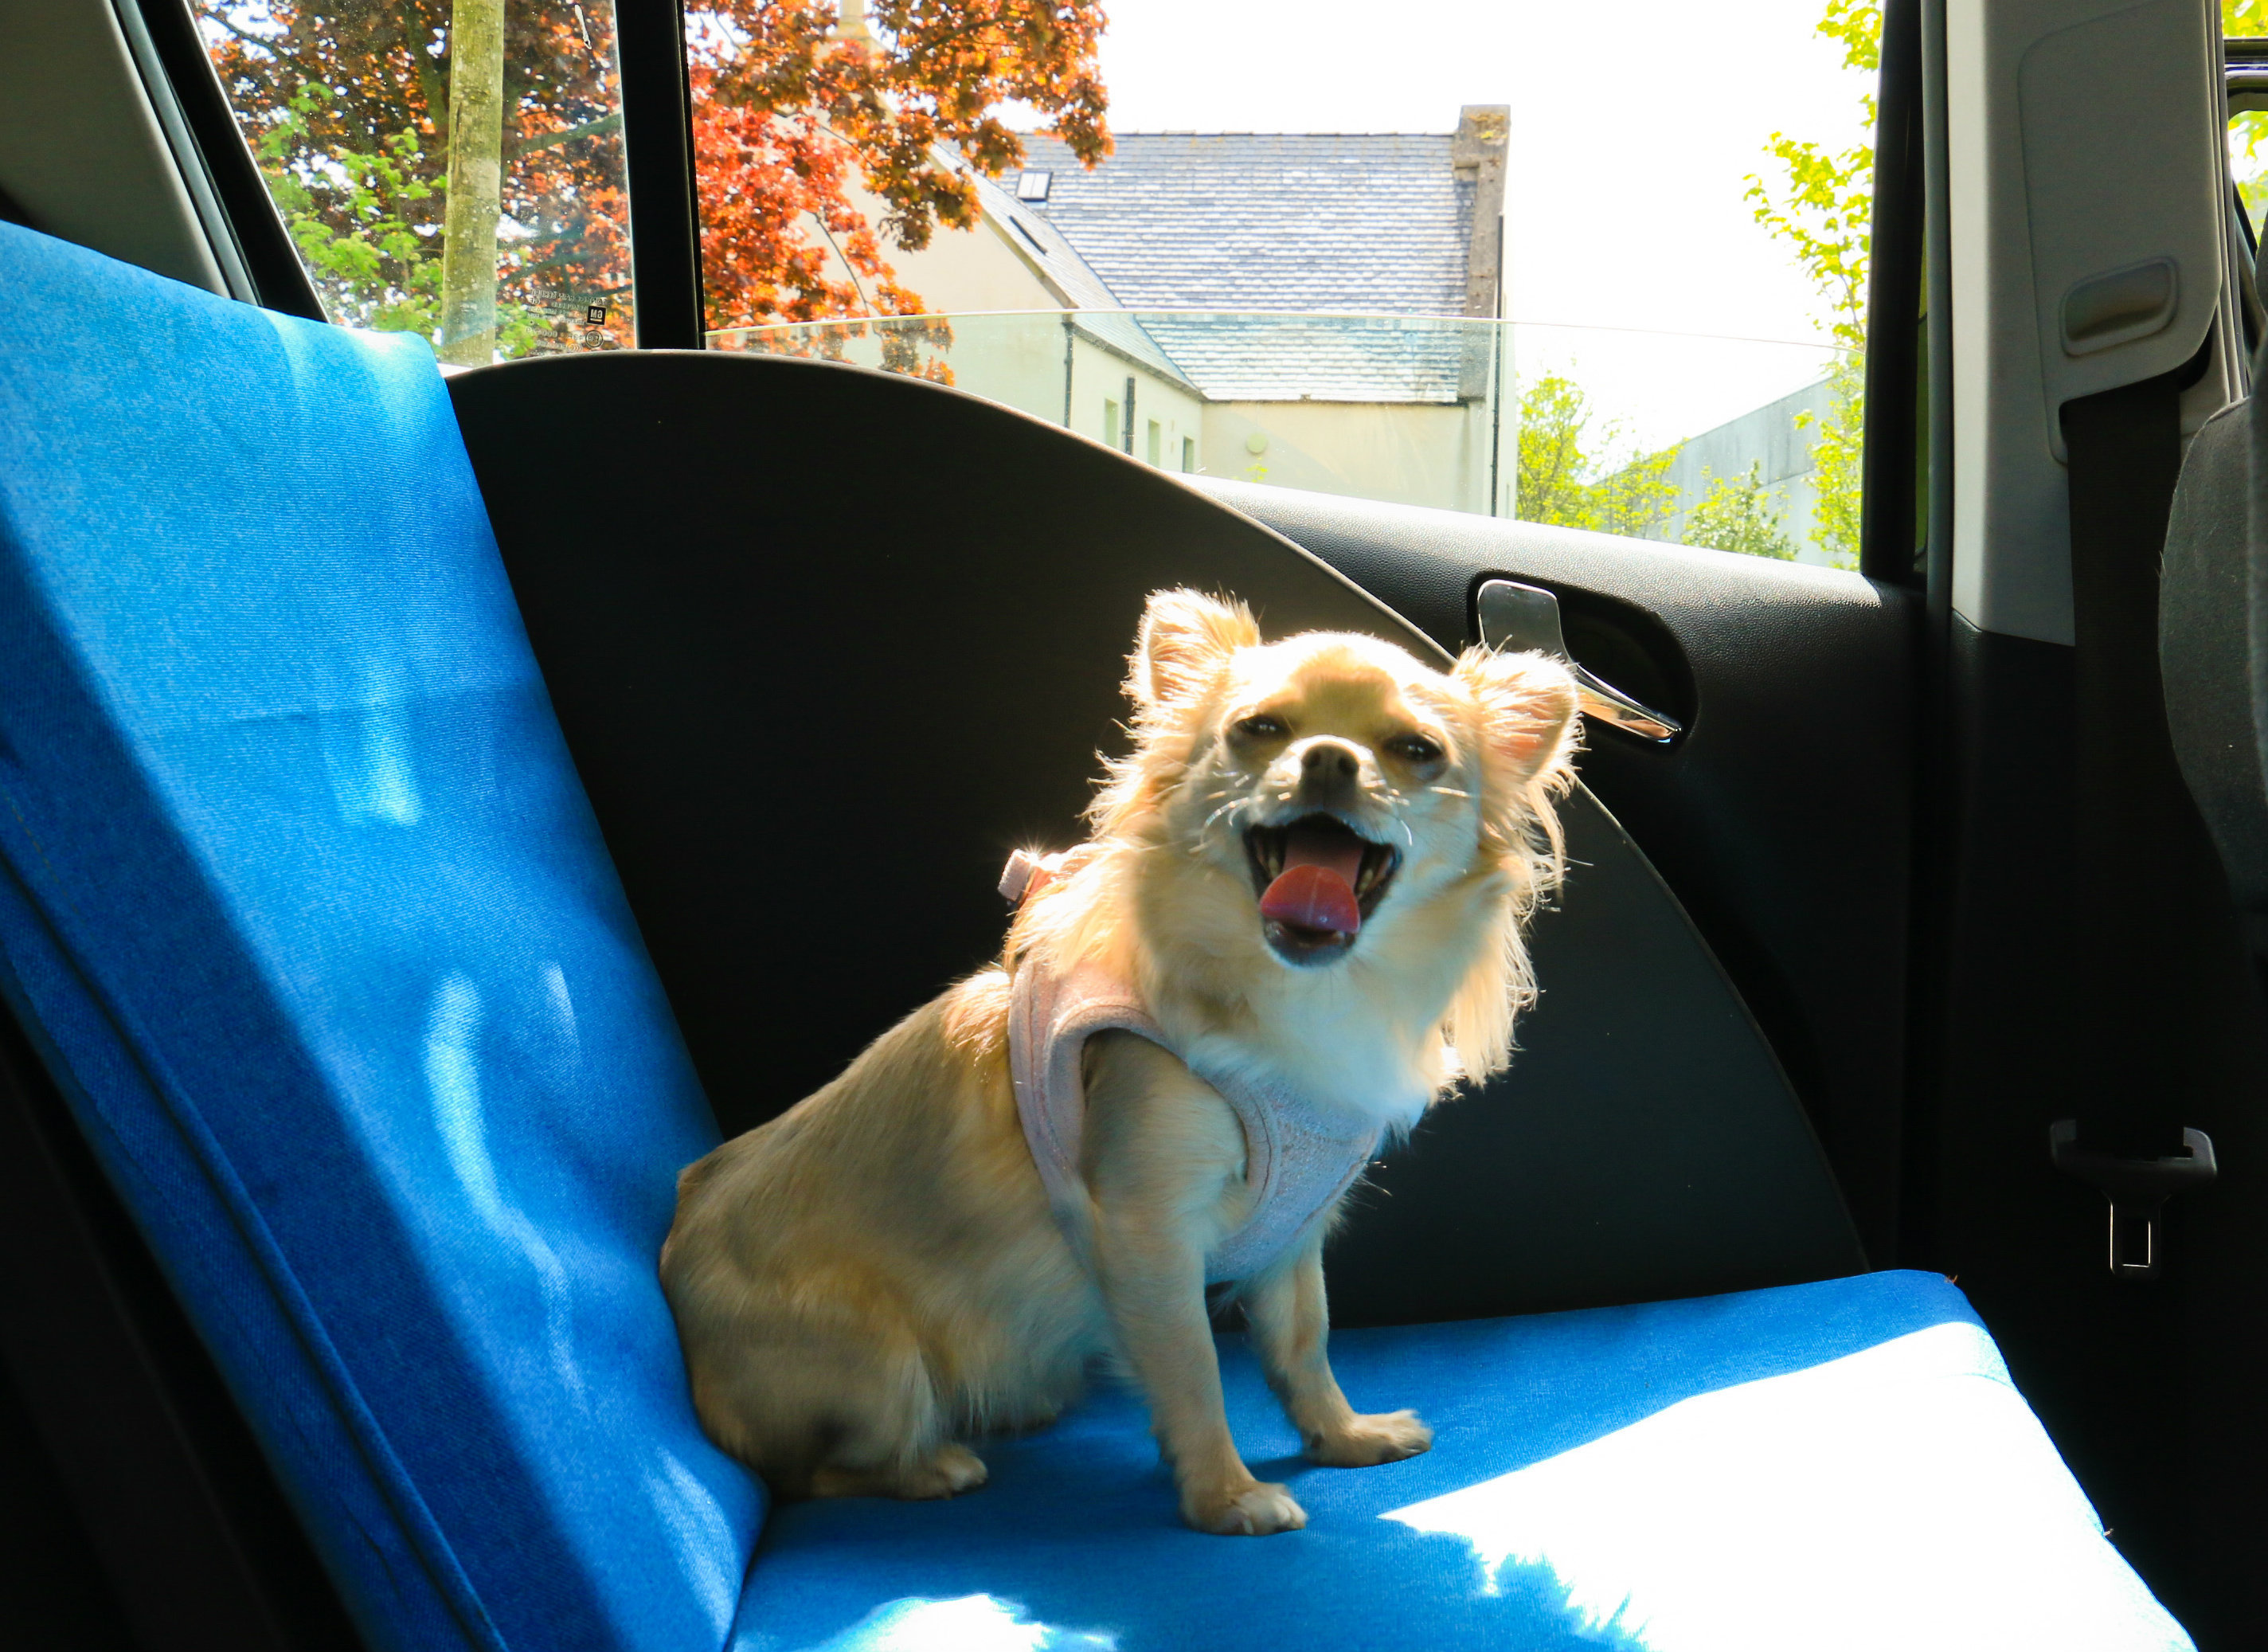 The dog car seat allows canines to have a safe and enjoyable journey